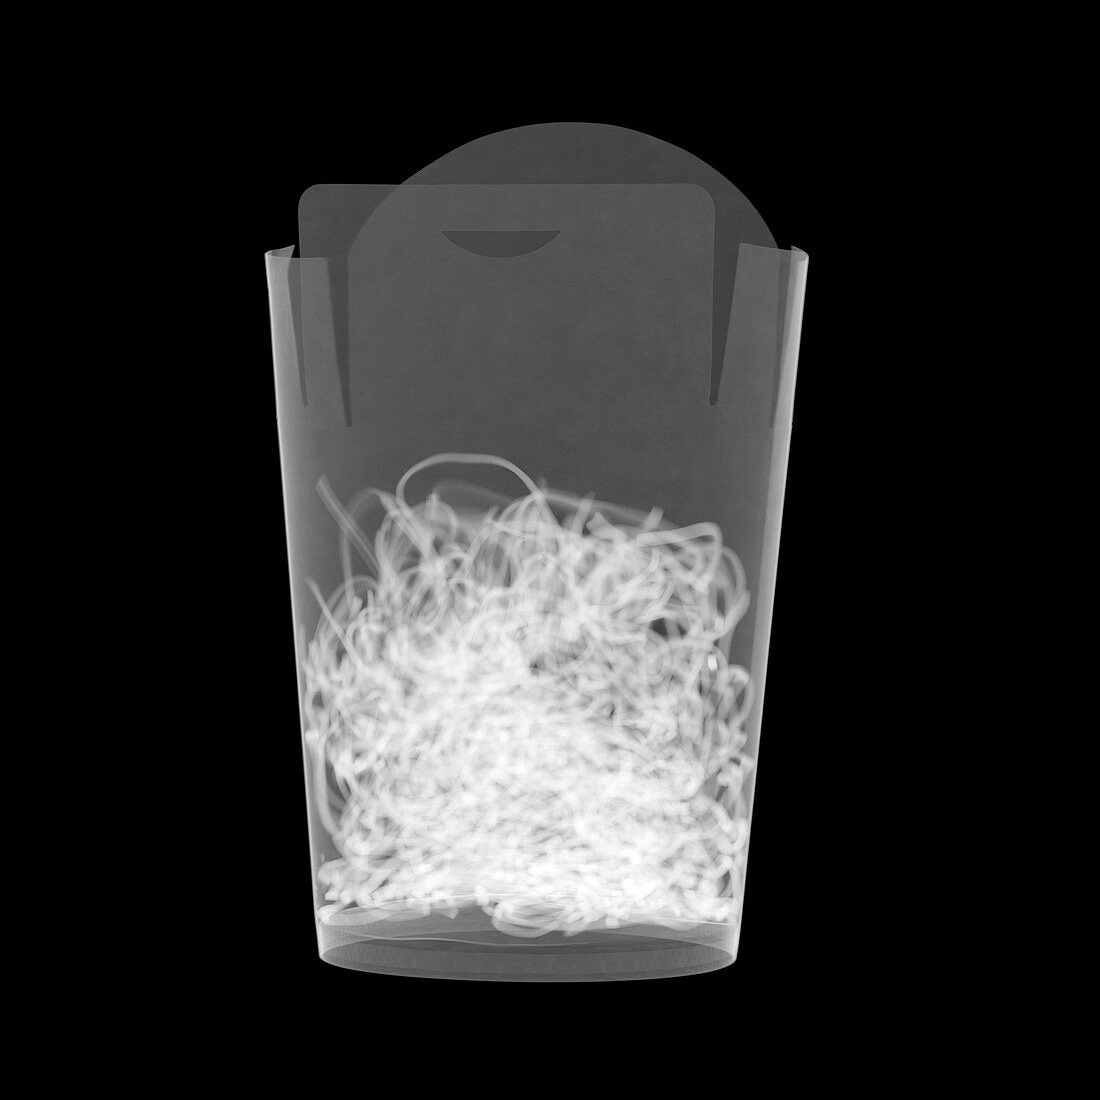 Chinese takeaway noodles, X-ray